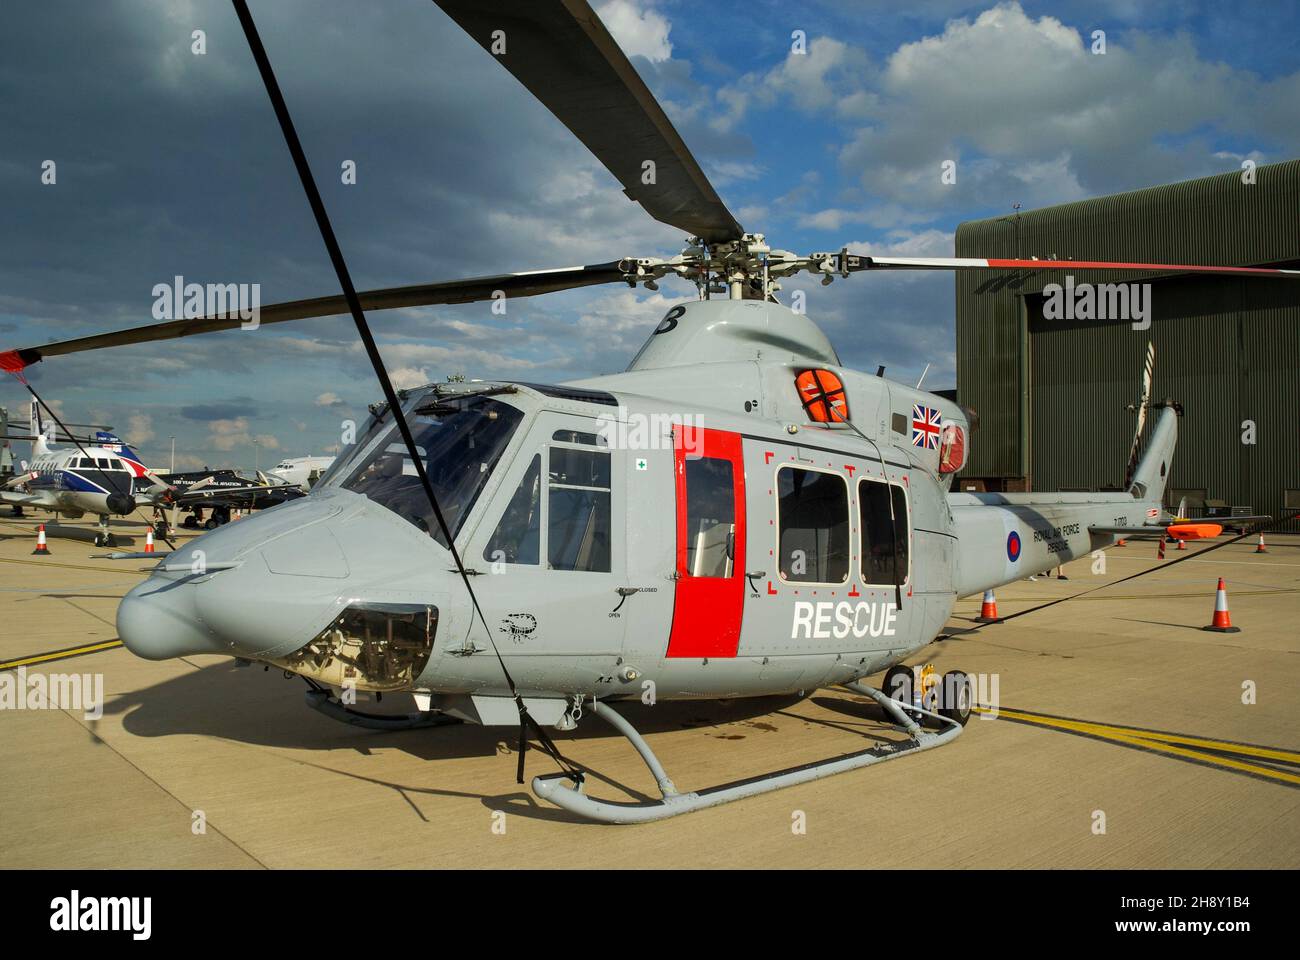 RAF Bell 412EP Griffin HAR2 helicopter ZJ703 on static display at the RAF Waddington airshow. 84 Squadron Royal Air Force Rescue helicopter Stock Photo